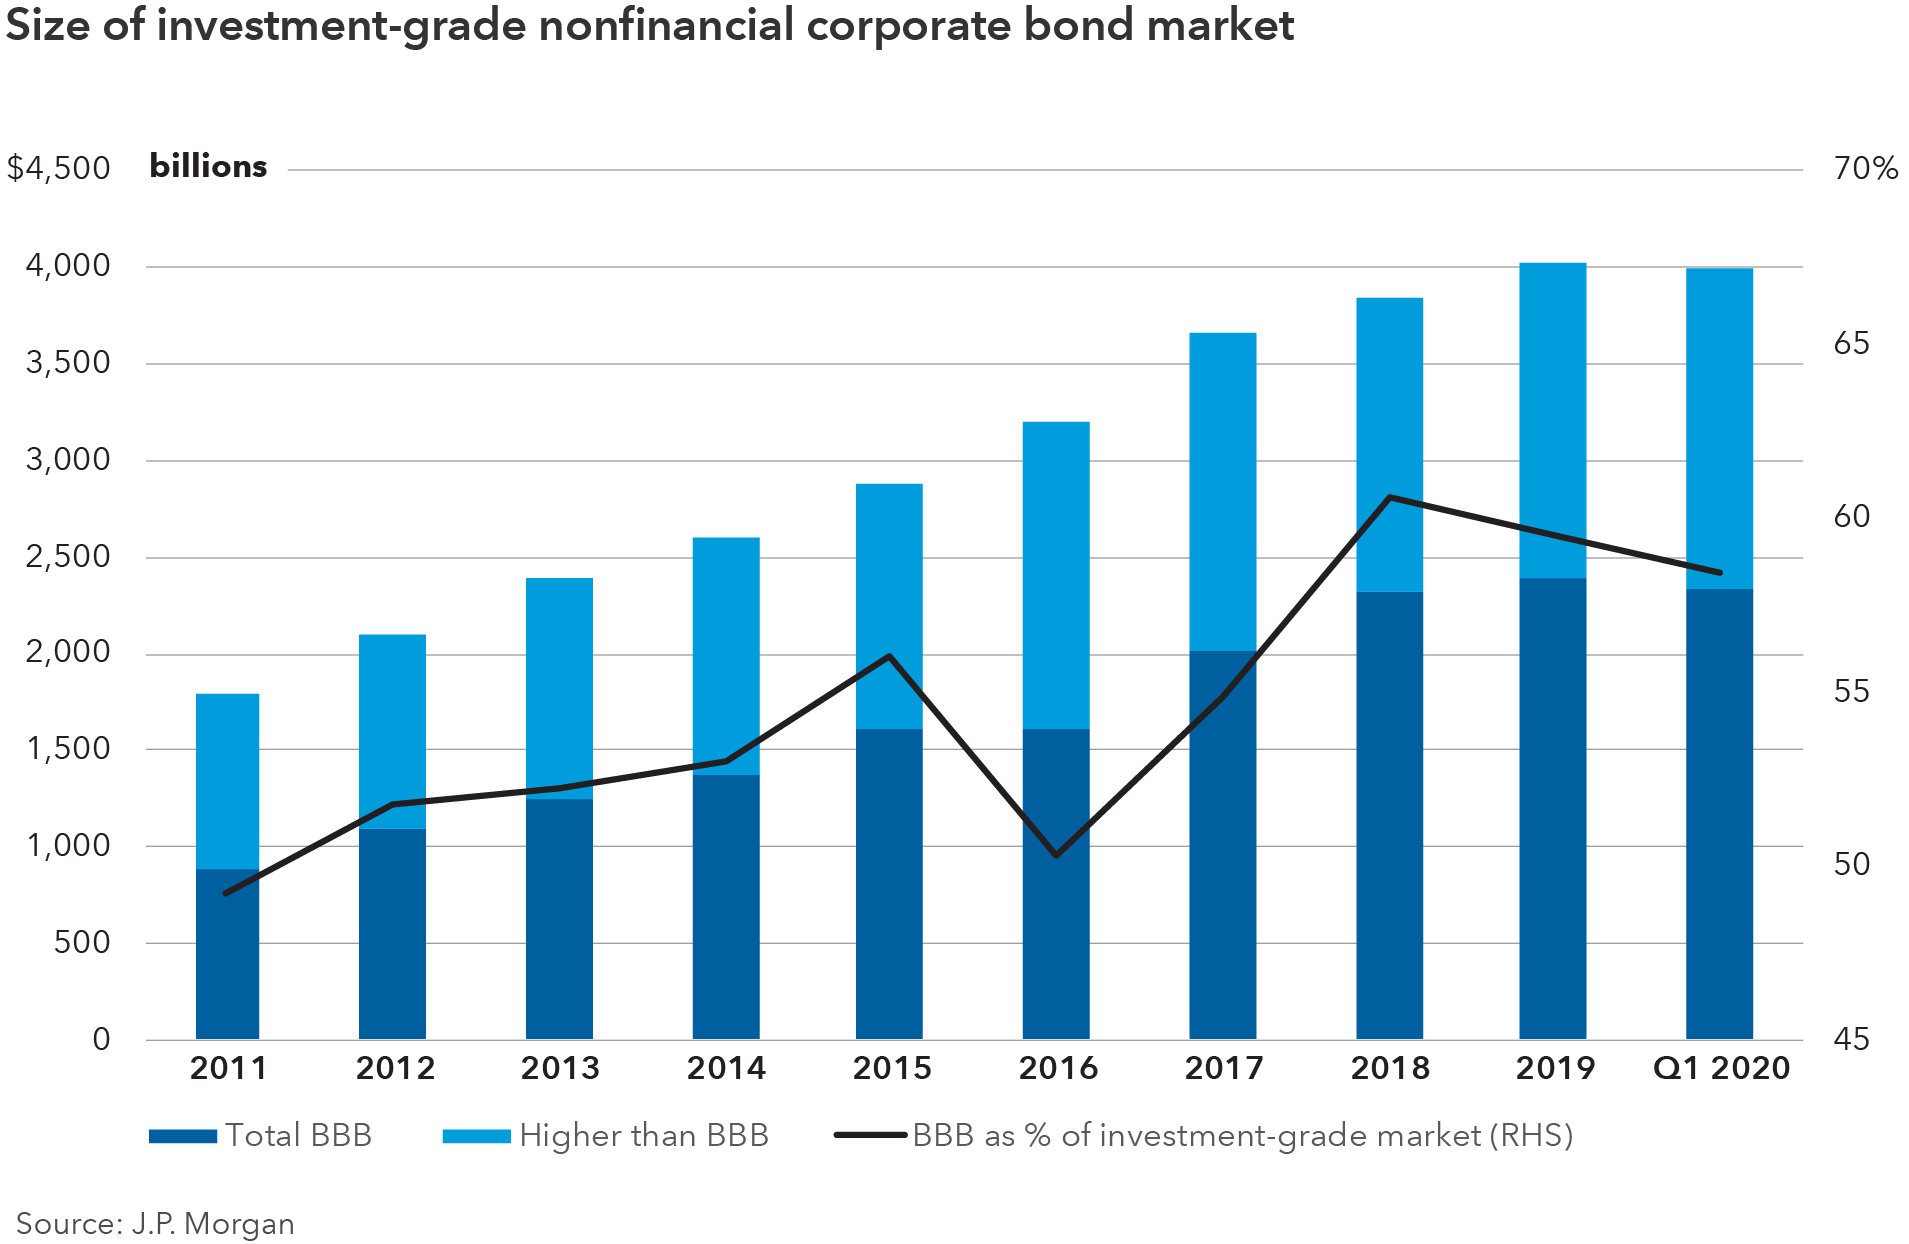 Chart depicts the size of the investment-grade nonfinancial corporate bond market from 2011 through the first quarter of 2020. Investment-grade bonds are those rated triple-B and above by rating agencies such as Moody's, Standard and Poor's and Fitch. It breaks out each year’s total dollar value between bonds rated BBB and bonds rated above BBB. It also shows the value of BBB-rated bonds as a percentage of the total value of the investment-grade market. In 2011, bonds rated BBB were valued at $883 billion and bonds rated above BBB were valued at $910 billion. In 2012, bonds rated BBB were valued at $1.089 trillion and bonds rated above BBB were valued at $1.016 trillion. In 2013, bonds rated BBB were valued at $1.247 trillion and bonds rated above BBB were valued at $1.139 trillion. In 2014, bonds rated BBB were valued at $1.379 trillion and bonds rated above BBB were valued at $1.224 trillion. In 2015, bonds rated BBB were valued at $1.613 trillion and bonds rated above BBB were valued at $1.264 trillion. In 2016, bonds rated BBB were valued at $1.612 trillion and bonds rated above BBB were valued at $1.595 trillion. In 2017, bonds rated BBB were valued at $2.009 trillion and bonds rated above BBB were valued at $1.653 trillion. In 2018, bonds rated BBB were valued at $2.325 trillion and bonds rated above BBB were valued at $1.512 trillion. In 2019, bonds rated BBB were valued at $2.391 trillion and bonds rated above BBB were valued at $1.627 trillion. In the first quarter of 2020, bonds rated BBB were valued at $2.332 trillion and bonds rated above BBB were valued at $1.657 trillion. The value of BBB-rated bonds represented 49.2% of the total investment-grade market in 2011, 51.7% in 2012, 52.3% in 2013, 53.0% in 2014, 56.1% in 2015, 50.3% in 2016, 54.9% in 2017, 60.6% in 2018, 59.5% in 2019 and 58.5% in the first quarter of 2020. Source: J.P. Morgan.